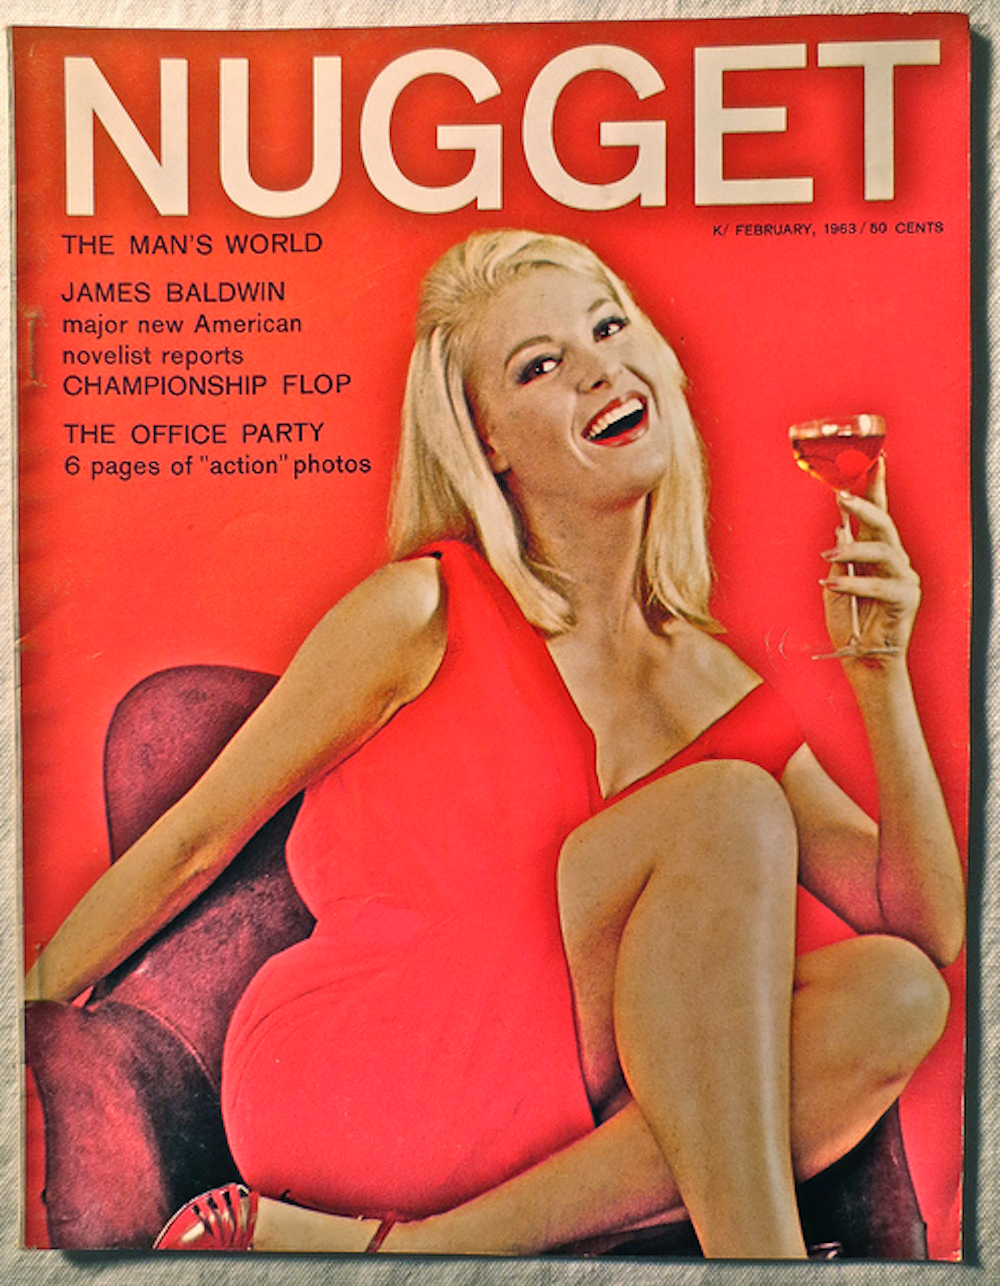 Nugget Porn Vintage Magazines - How Playboy skirted the anti-porn crusade of the 1950s